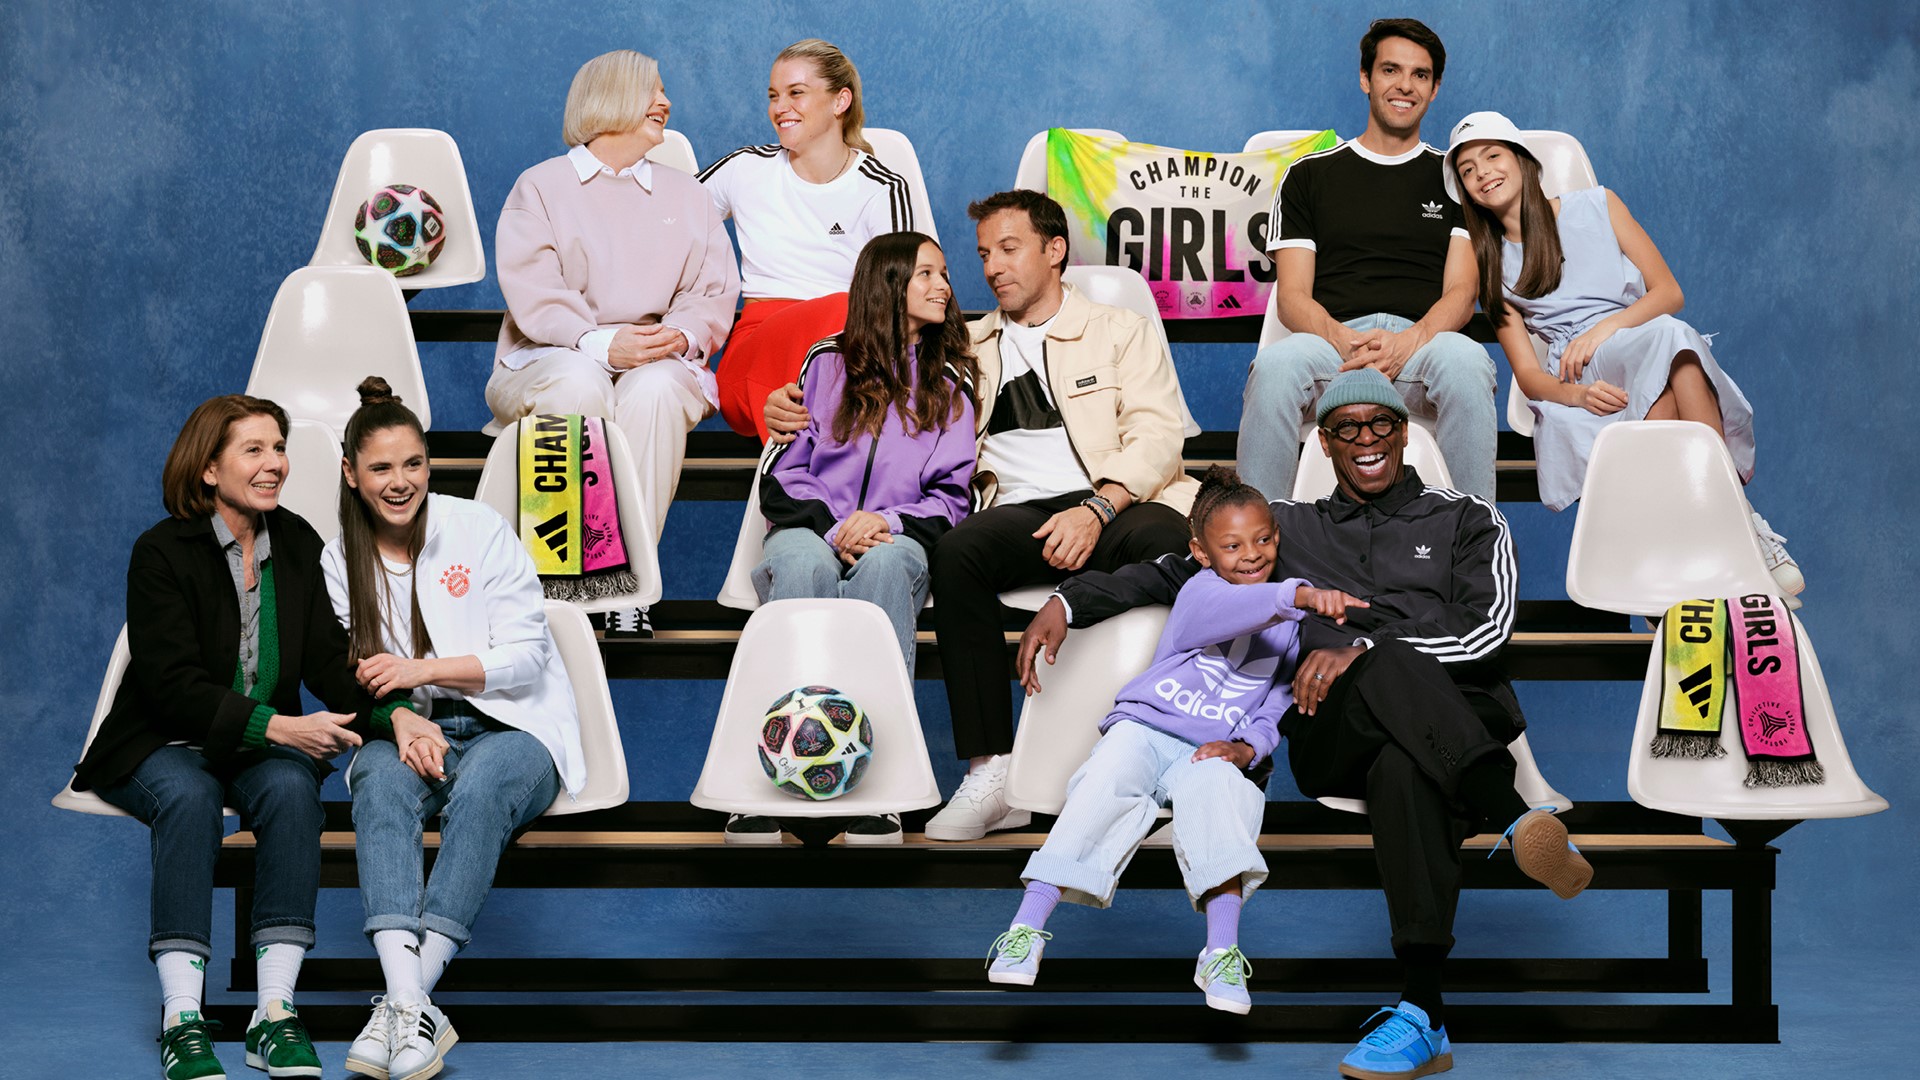 Save a Seat for Next Generation Fans Players at the UEFA Women's Champions League Final